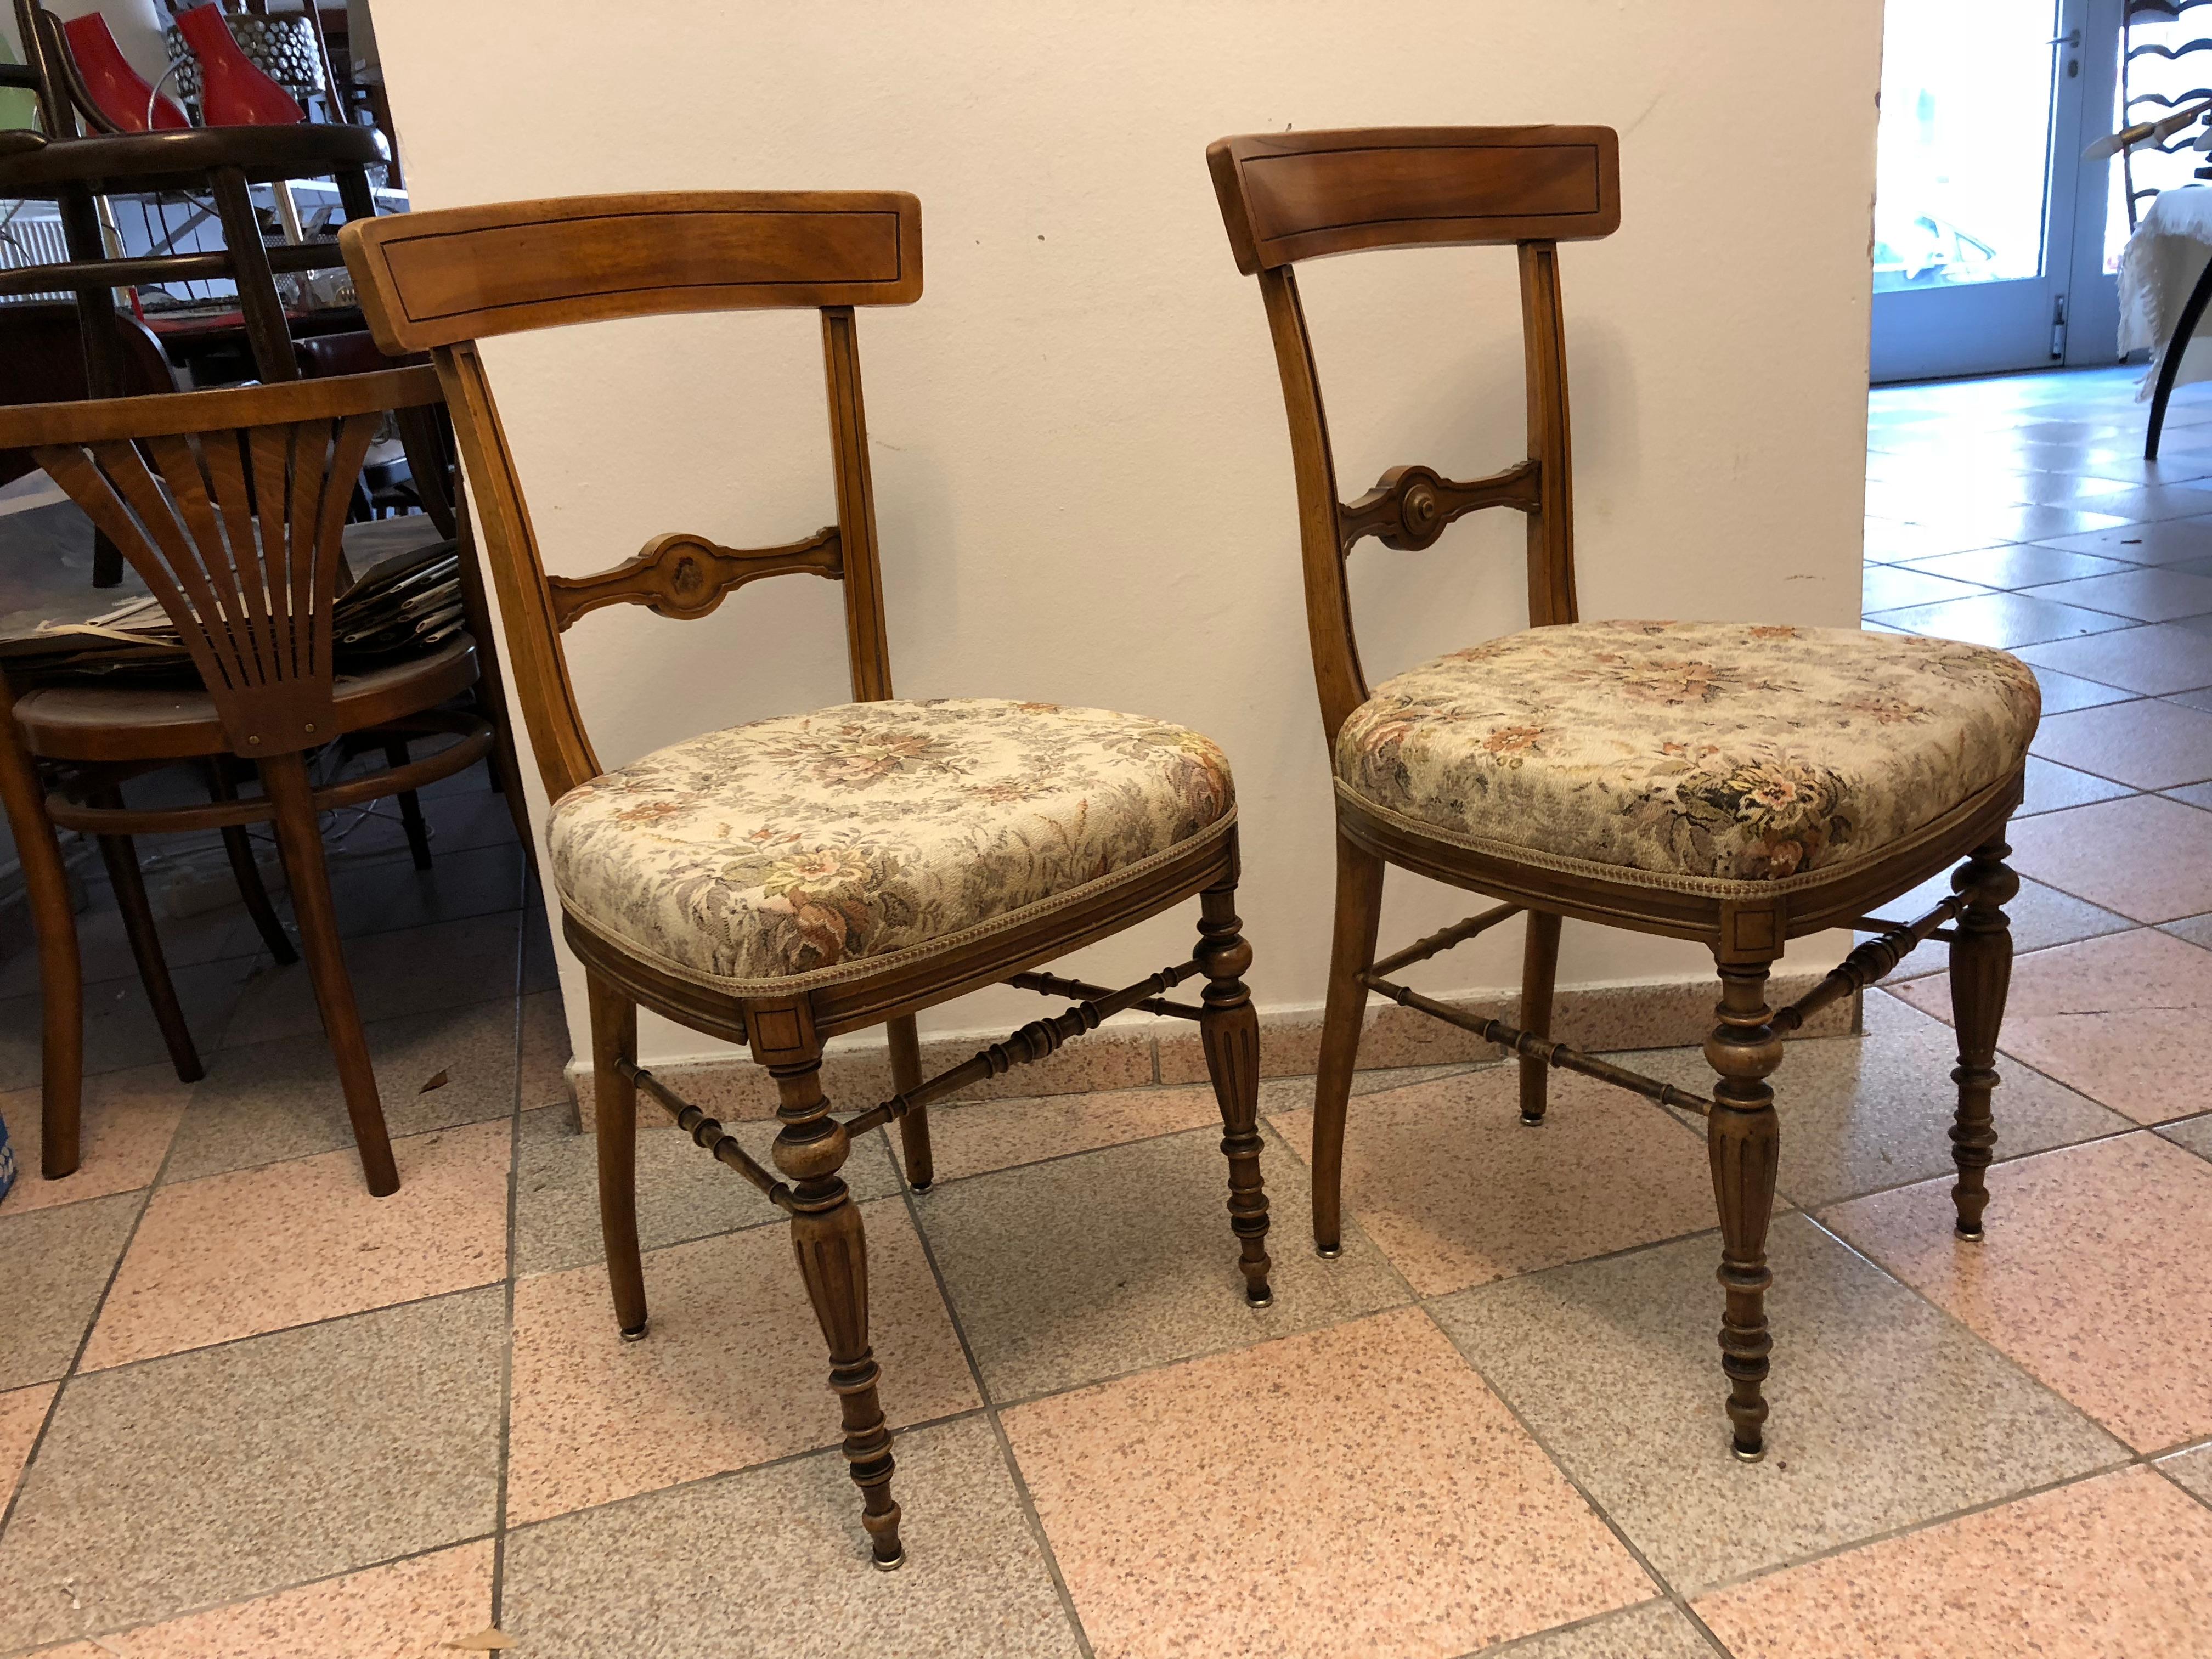 Walnut frame with upholstered seat made in Austria about 1860-1870 design attributed to Theophil Hansen.
Complete restoration on request possible.
Price for both, delivery time 3-4 weeks.